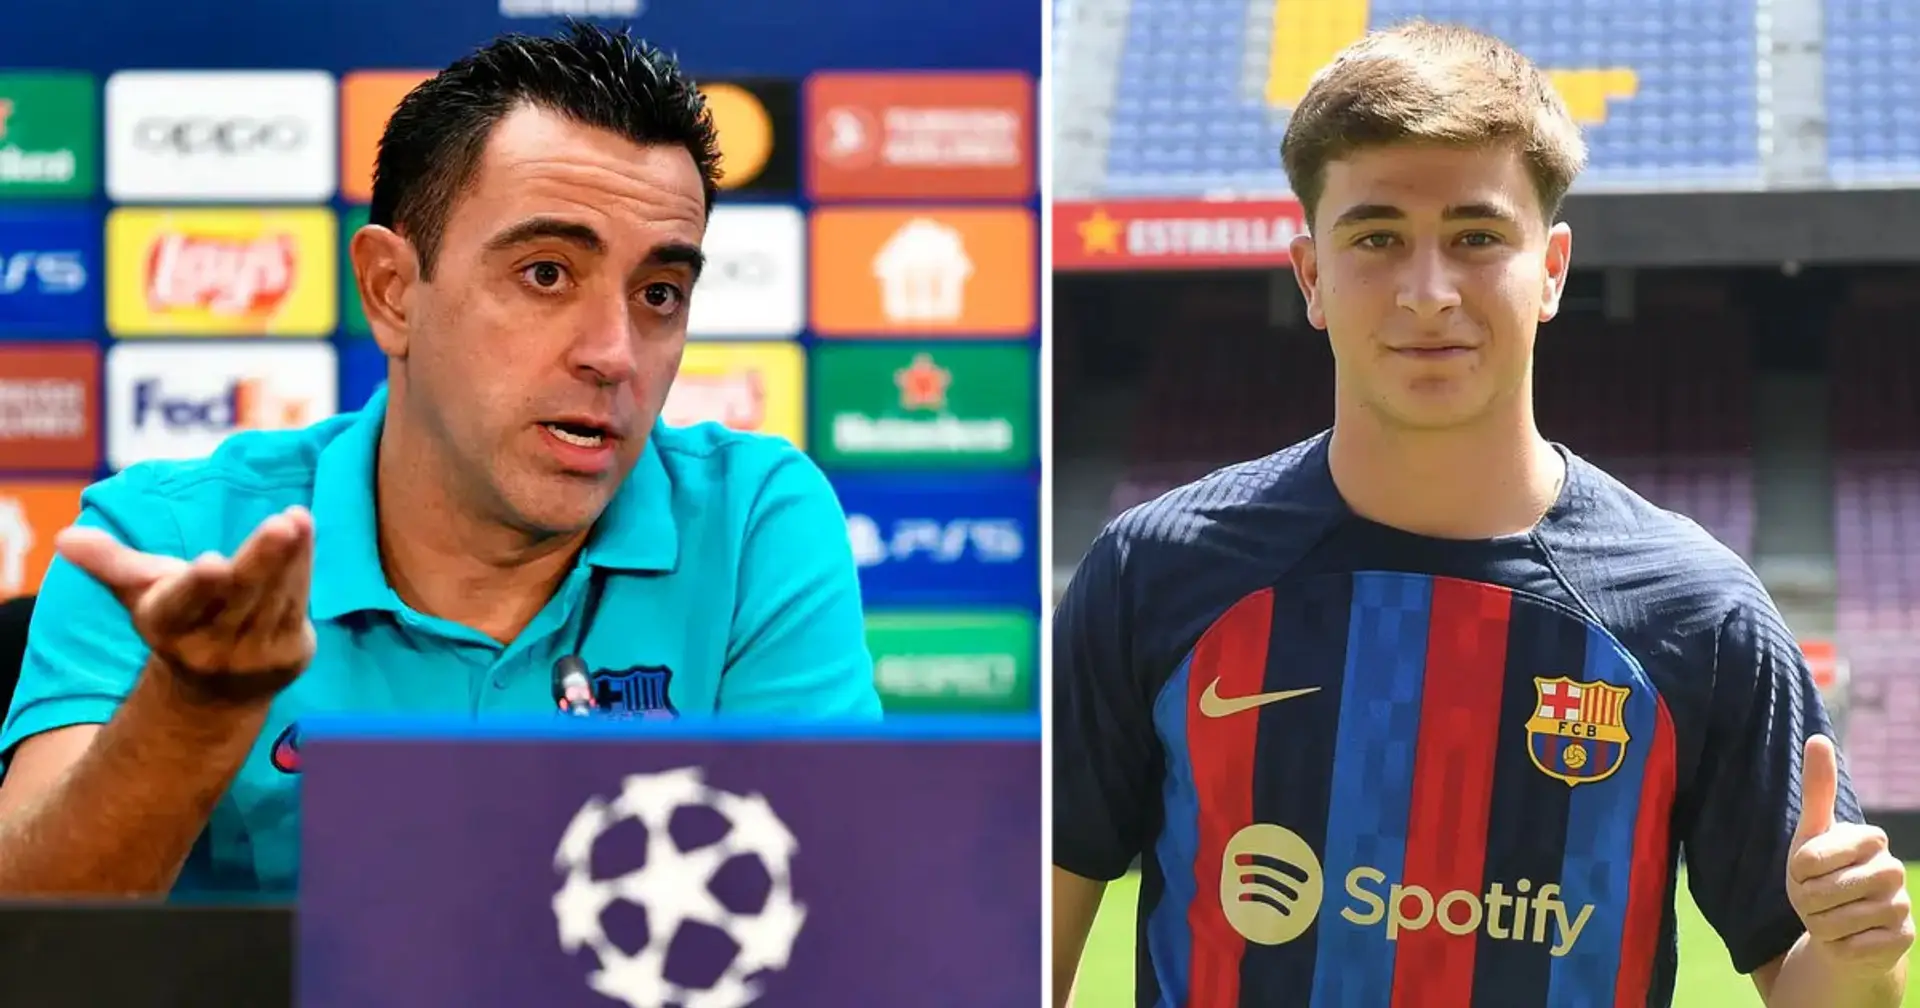 Pablo Torre 'upset' about his situation at Barca, Xavi plans to give him minutes soon